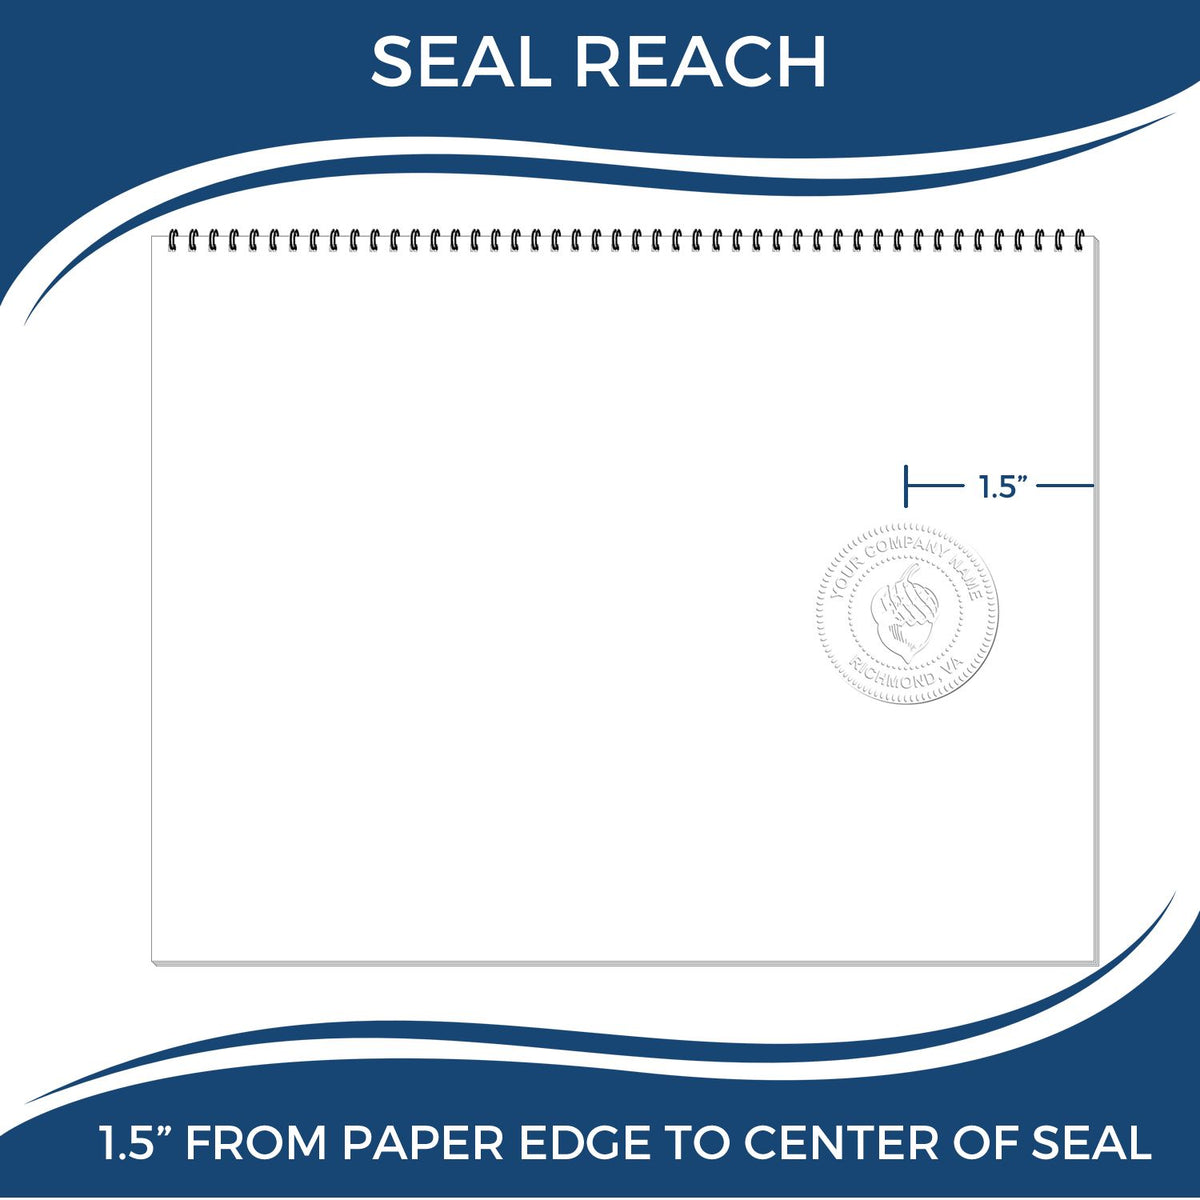 An infographic showing the seal reach which is represented by a ruler and a miniature seal image of the Nebraska Engineer Desk Seal